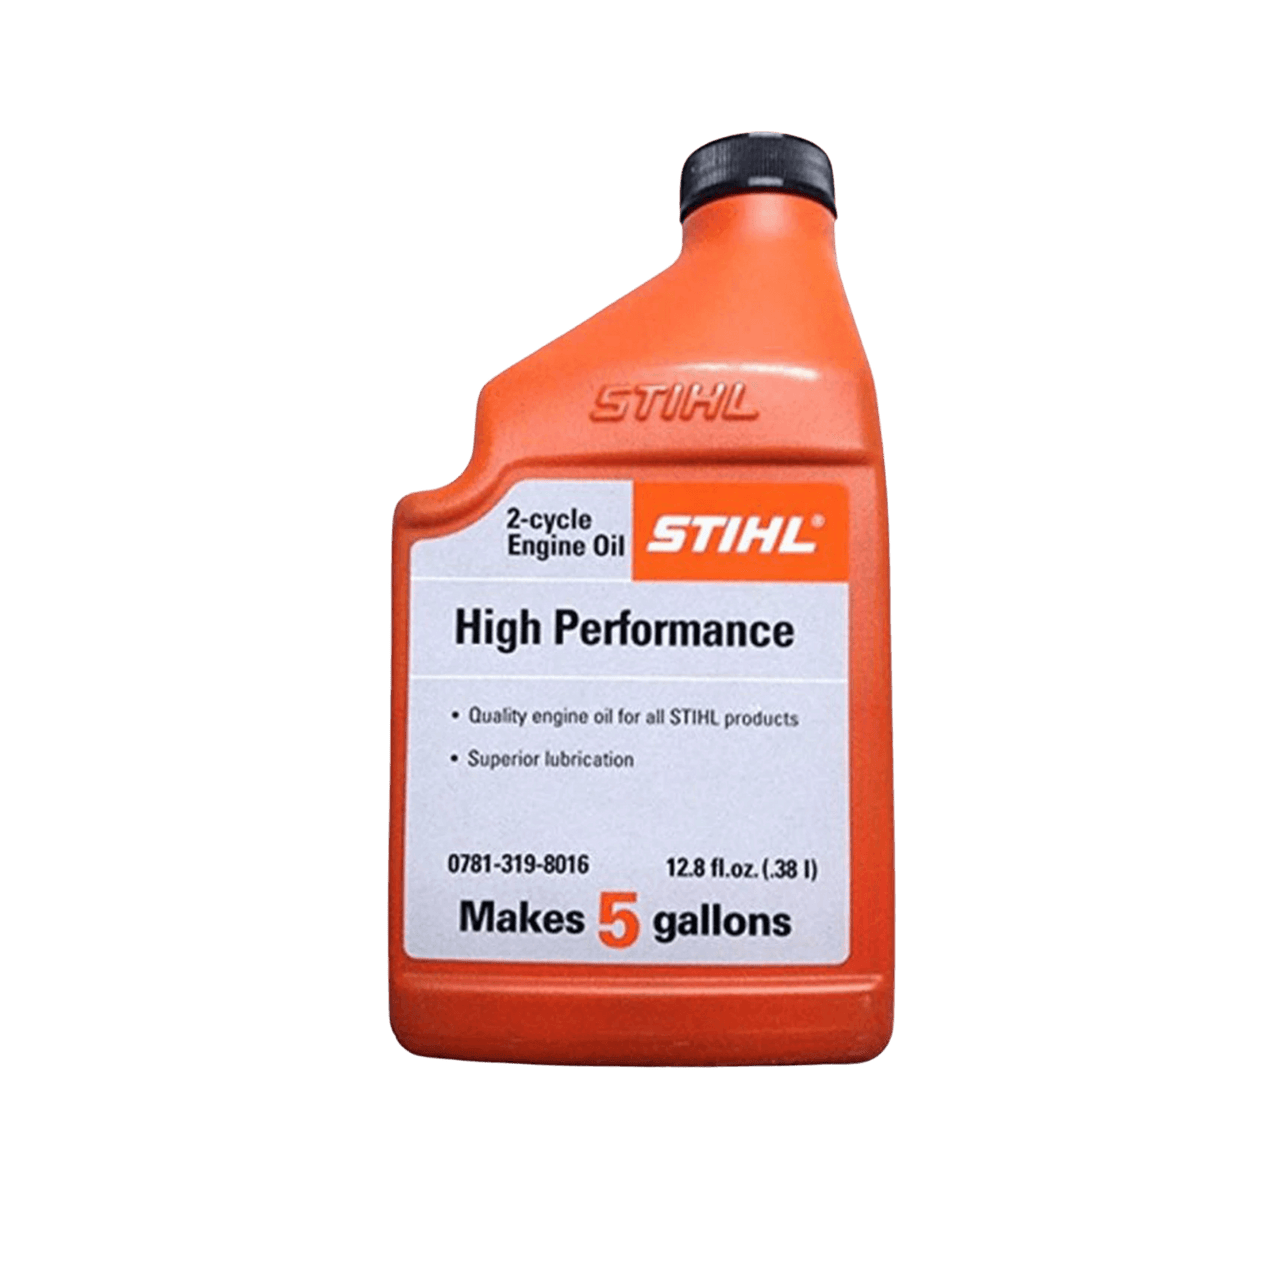 STIHL High Performance 2-Cycle Engine Oil 12.8 oz (Single) | Oils & Lubricants | Gilford Hardware & Outdoor Power Equipment